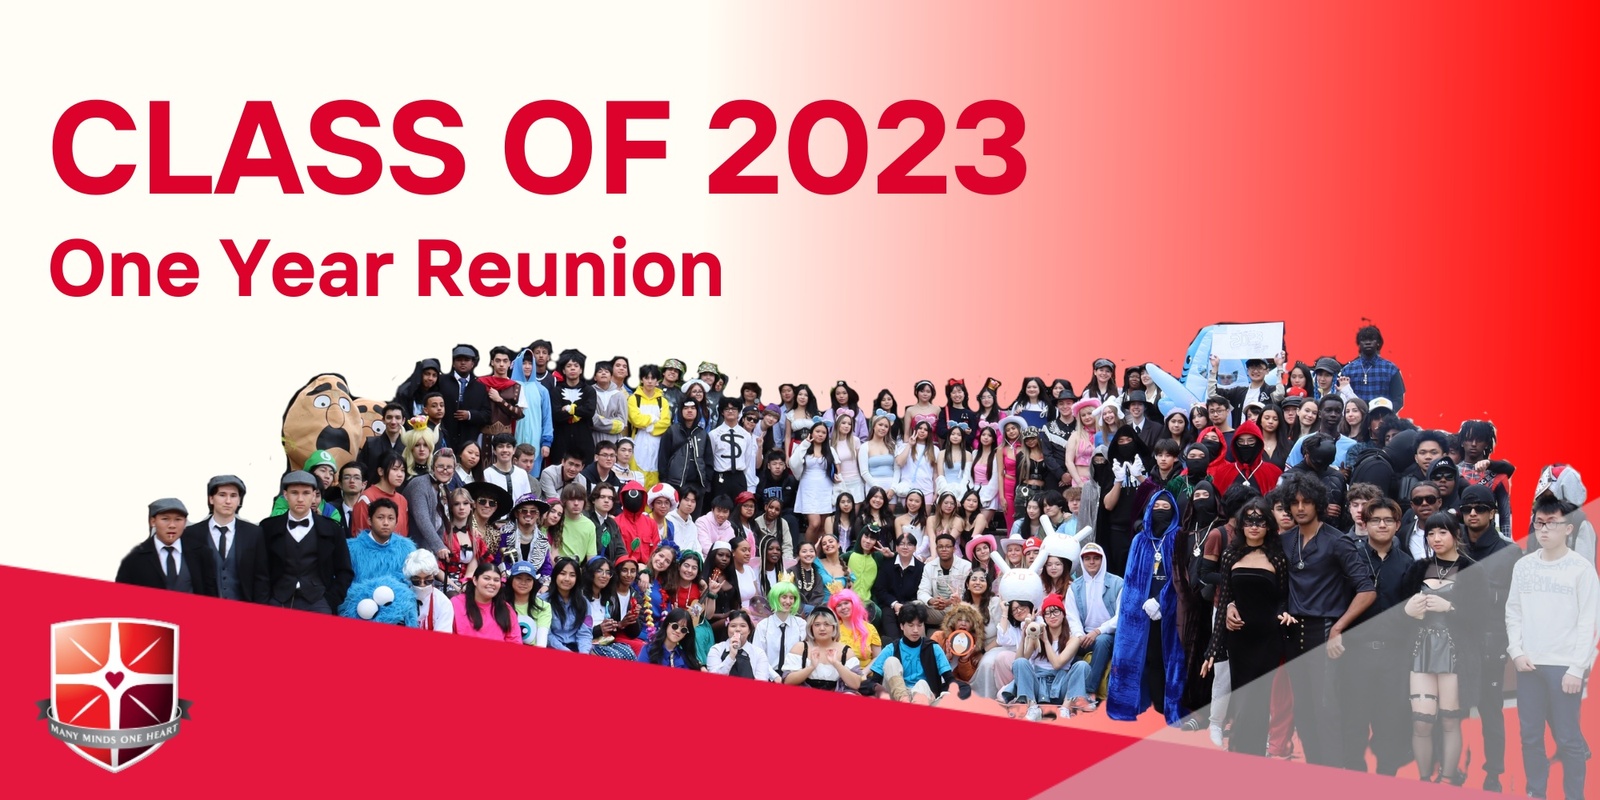 Banner image for 1 Year Reunion for the Caroline Chisholm Catholic College Class of 2023